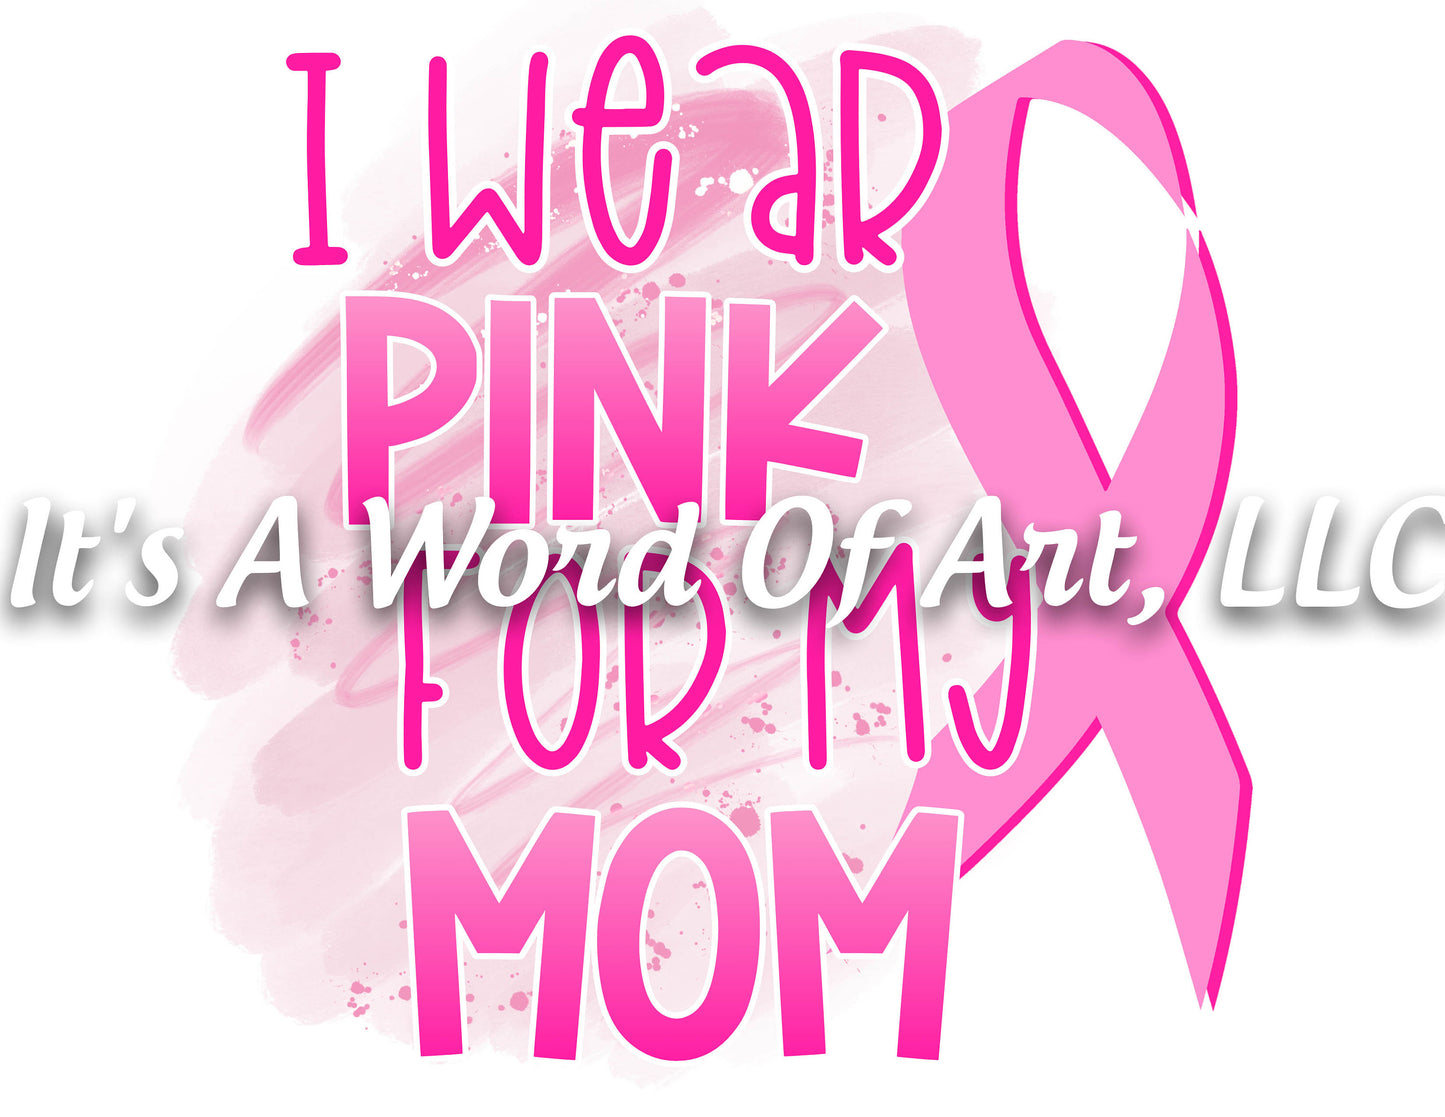 Breast Cancer Awareness 09 - I Wear Pink for My Mom Awareness Ribbon - Sublimation Transfer Set/Ready To Press Sublimation Transfer